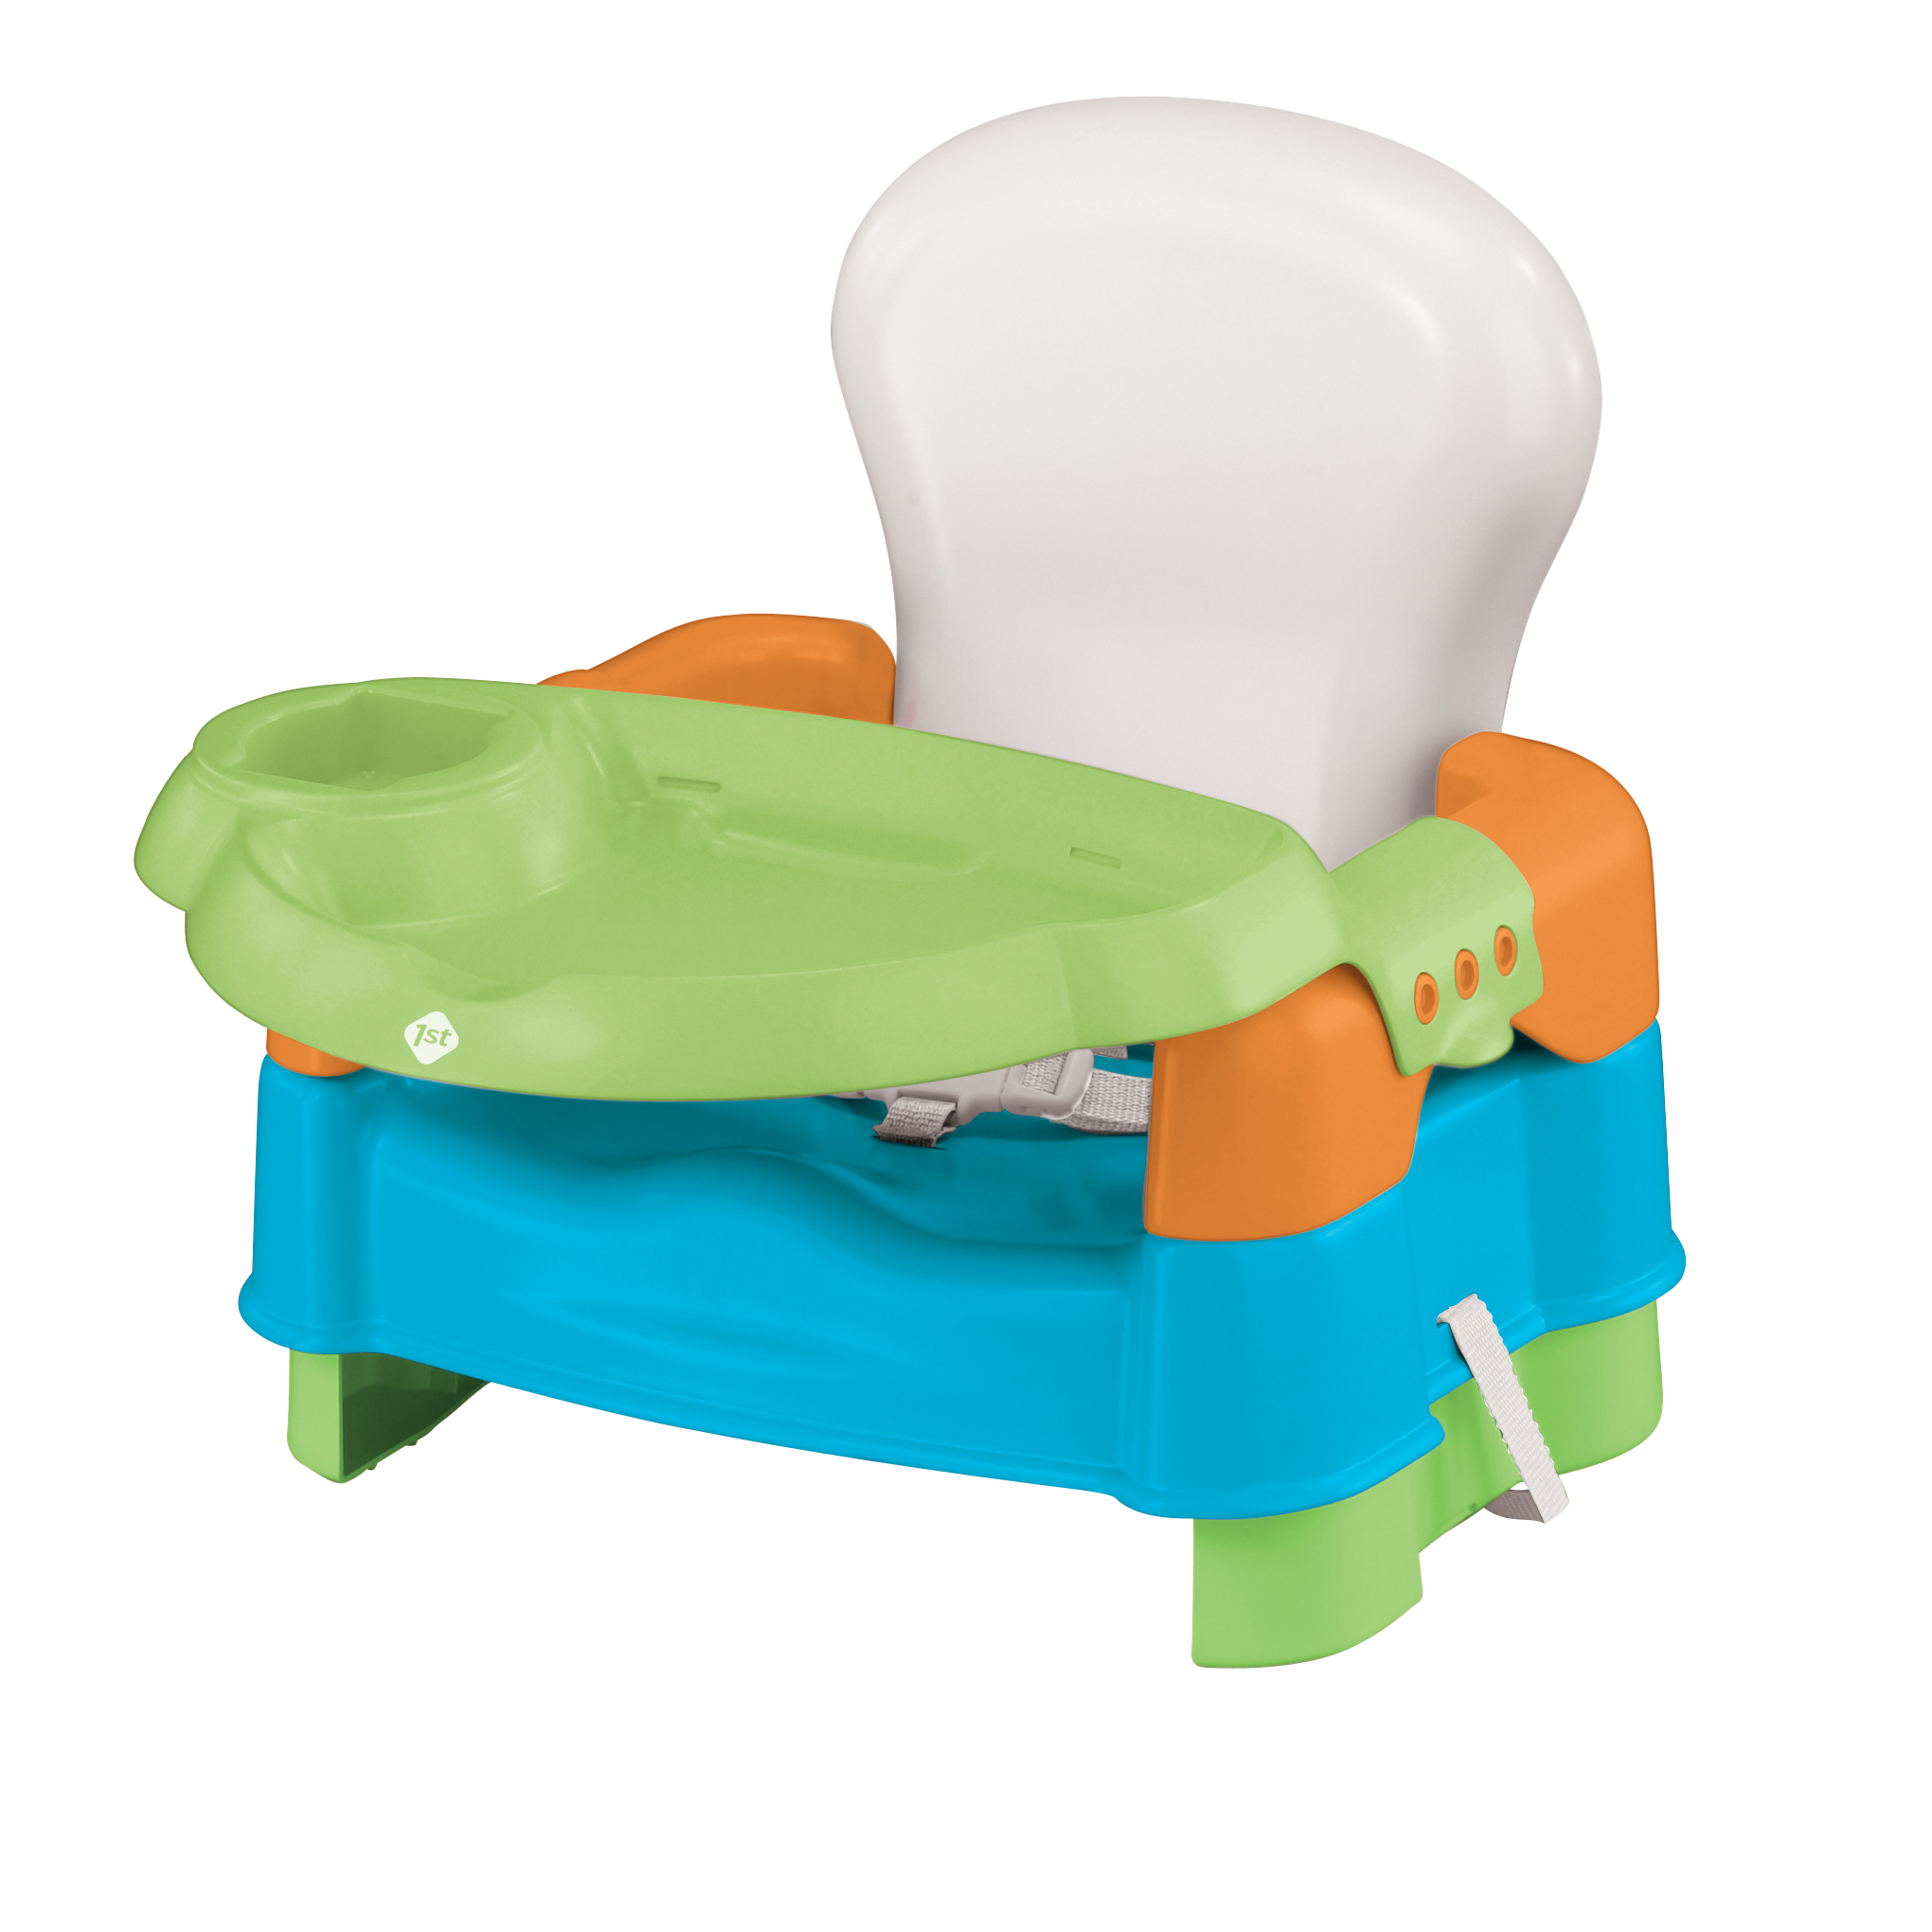 high chairs and boosters